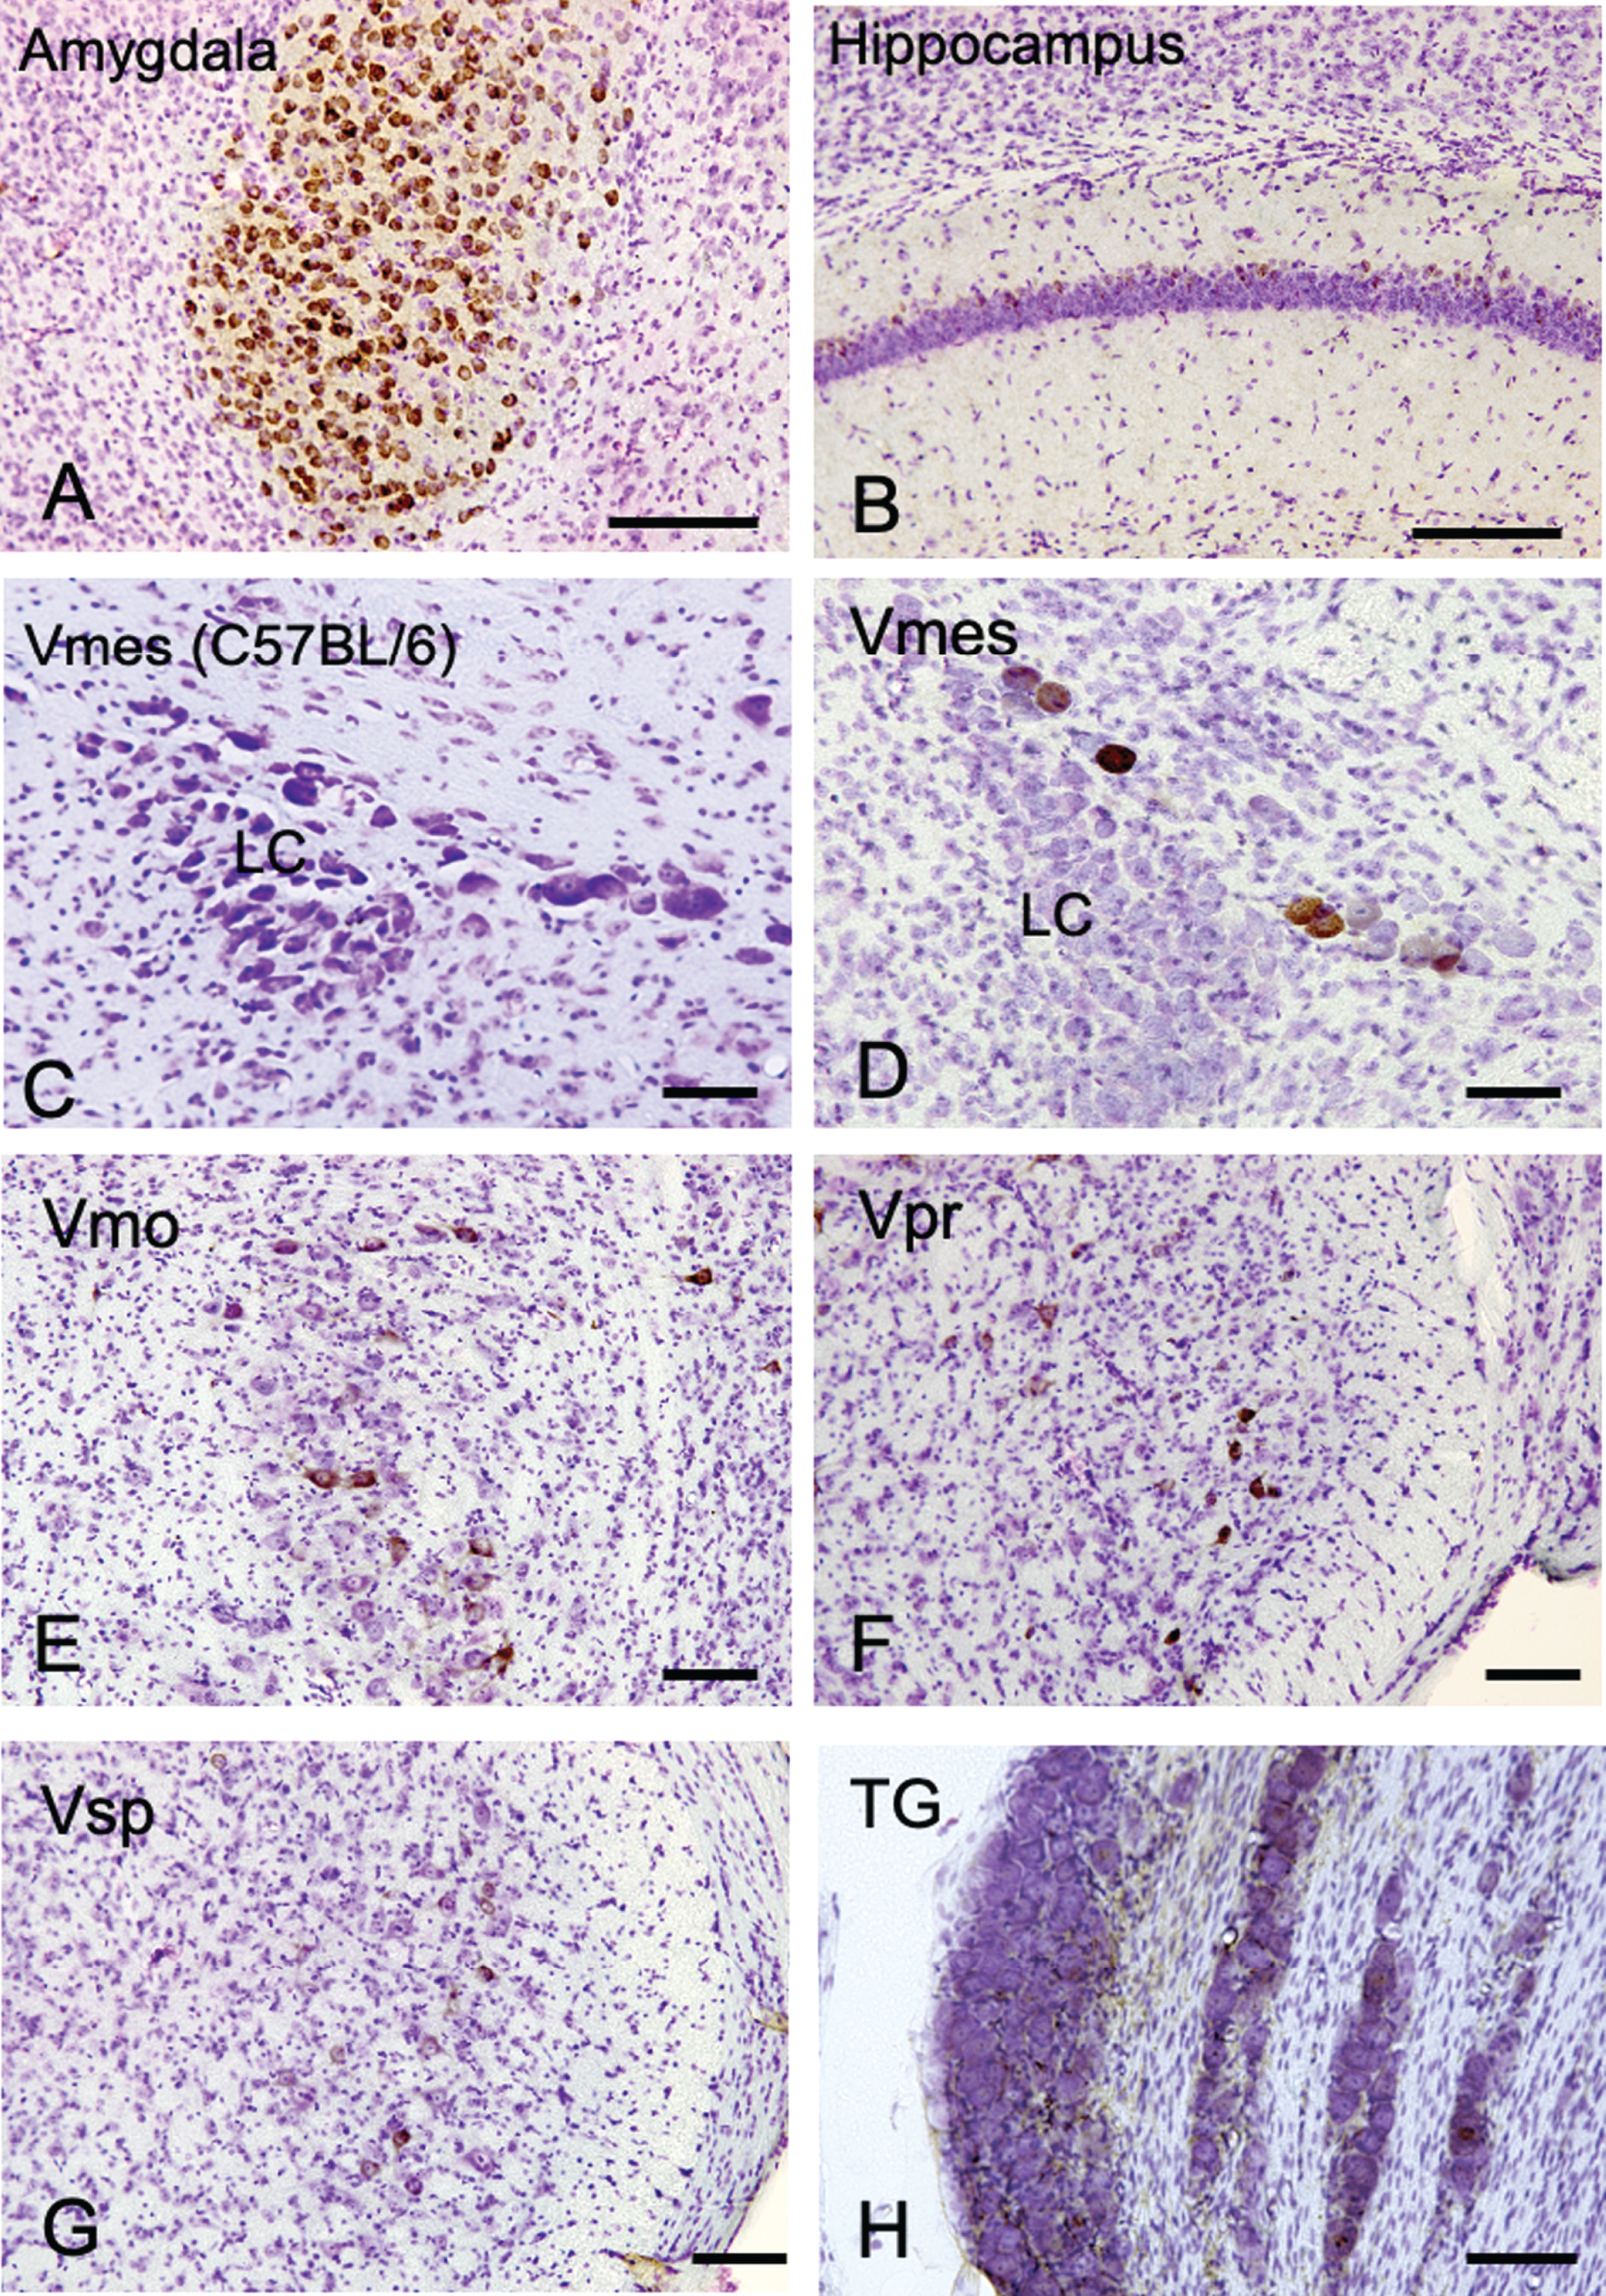 The distribution of Aβ-IR neurons in the cerebrum and the trigeminal nervous system in 4-month-old 3×Tg-AD mice using an anti-Aβ antibody (6E10). A, B) In the positive control, strong Aβ-IR neurons were found in amygdala, and relatively weak Aβ immunopositivity was observed in the hippocampus. C) In wild-type C57BL/6 mice, which were used as negative controls, no Aβ-IR Vmes neurons were found. D–H) In the trigeminal nervous system intensely Aβ-IR neurons were found in the trigeminal mesencephalic nucleus (Vmes), weak scattered Aβ-IR neurons were observed in the trigeminal motor nucleus (Vmo), trigeminal principal nucleus (Vpr), and trigeminal spinal nucleus (Vsp). Small number of Aβ-IR neurons were found in the trigeminal ganglion (TG). The sections were counterstained with cresyl violet. LC, locus coeruleus. Scale bars: A, B, E-H, 200 μm; C, D, 50 μm.